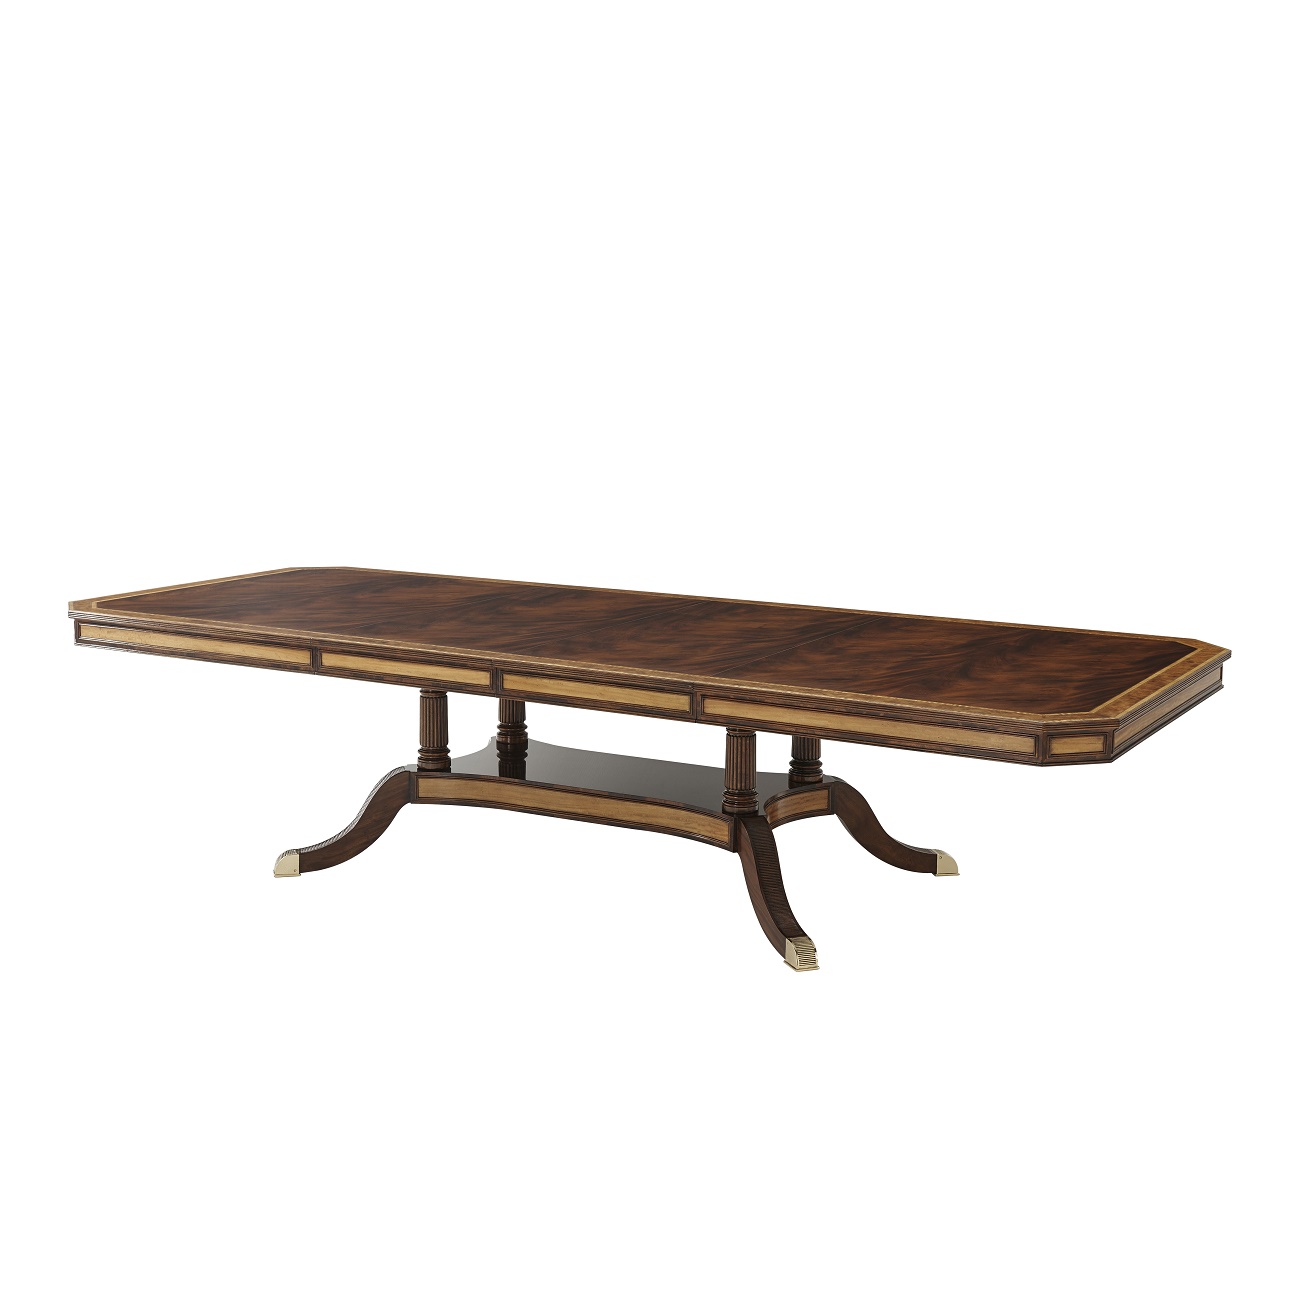 Gabrielles Dining Table, Theodore Alexander Table Brooklyn, New York 